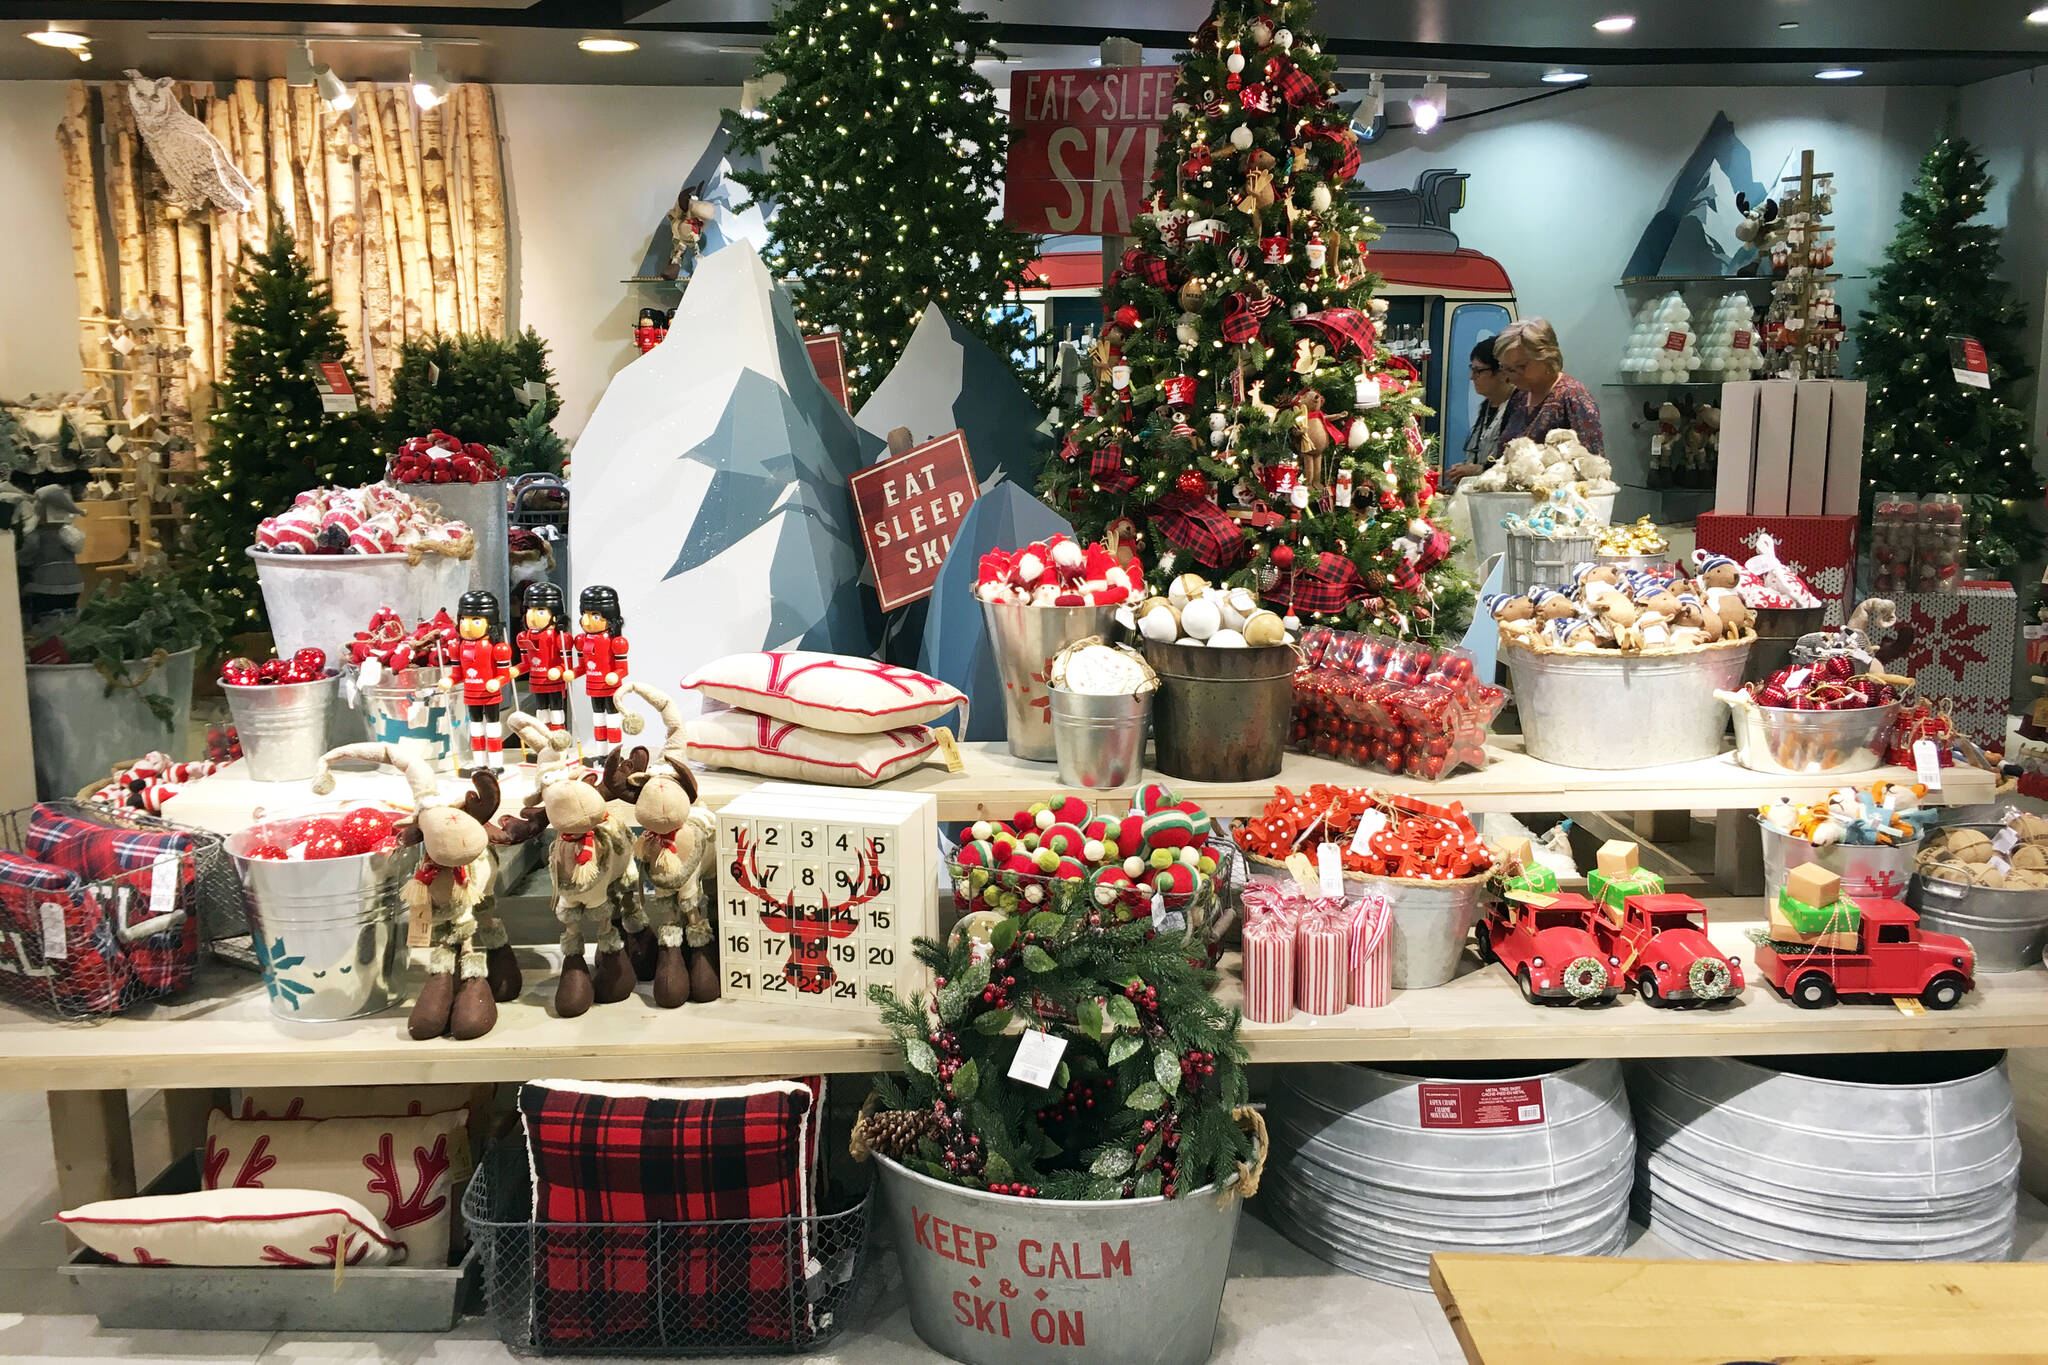 Toronto stores already selling Christmas decorations and people aren't